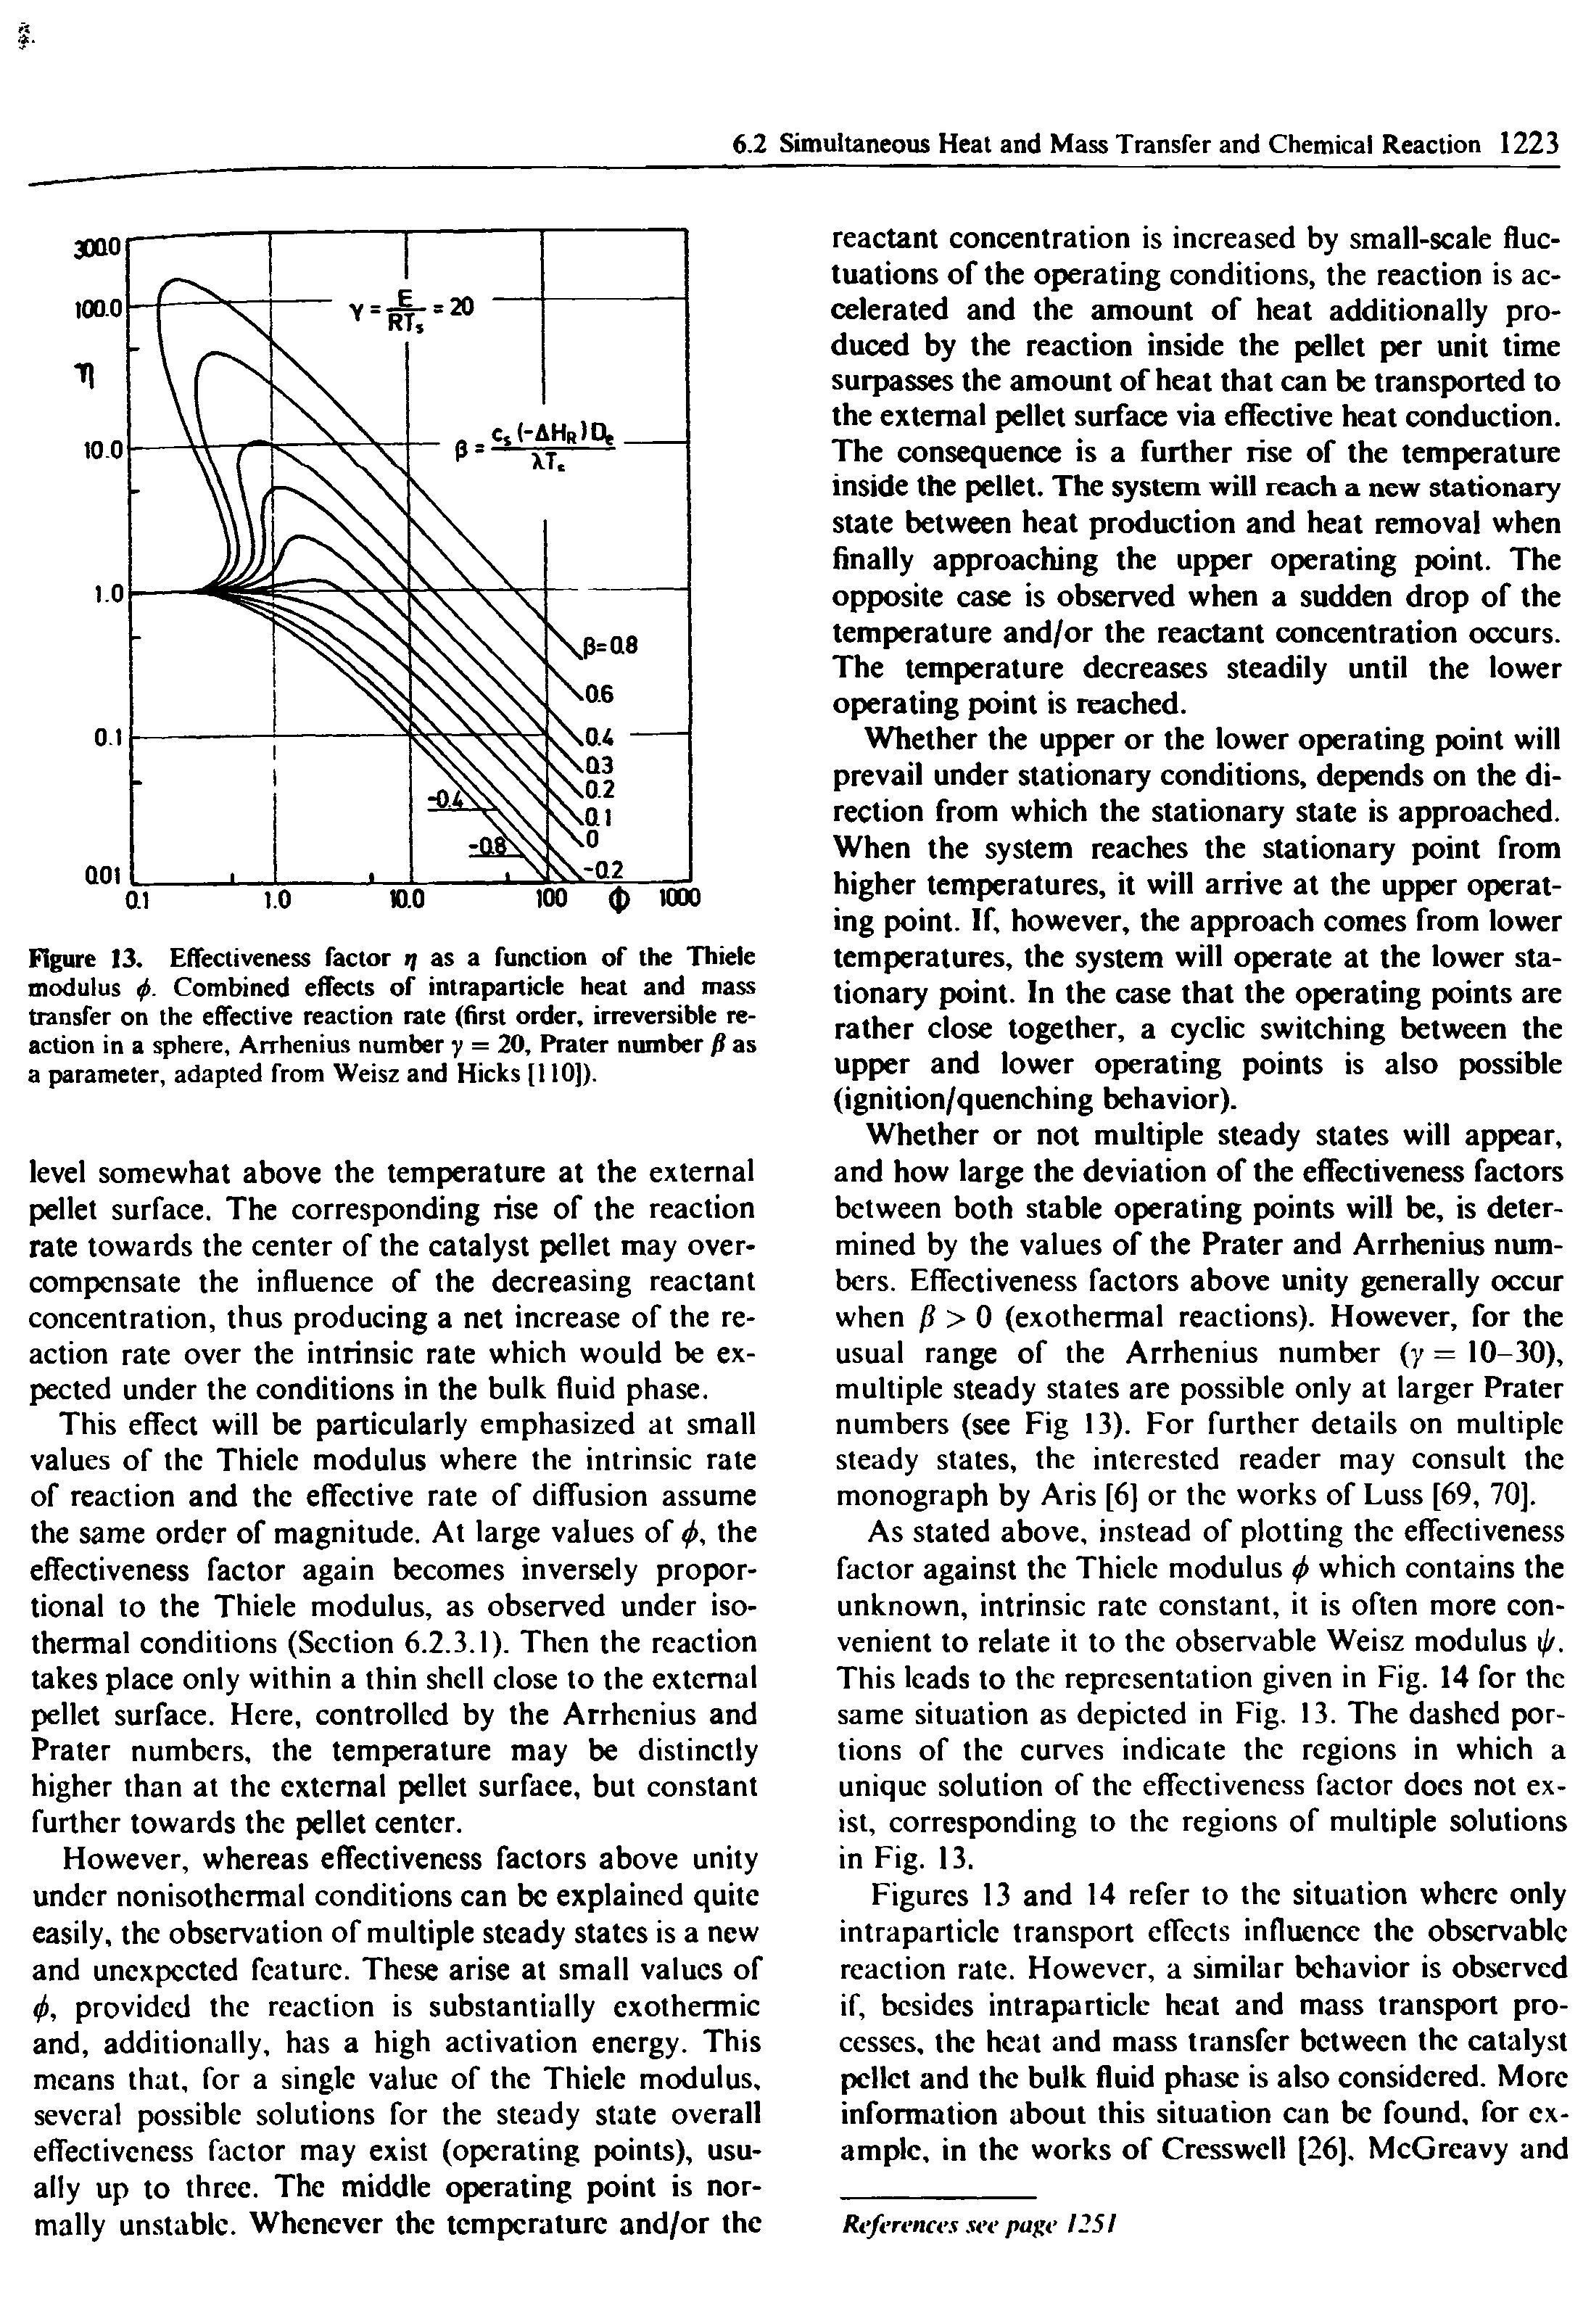 Figures 13 and 14 refer to the situation where only intraparticlc transport effects influence the observable reaction rate. However, a similar behavior is observed if, besides intraparticle heat and mass transport processes, the heat and mass transfer between the catalyst pellet and the bulk fluid phase is also considered. More information about this situation can be found, for example, in the works of Cresswell [26], McGreavy and...